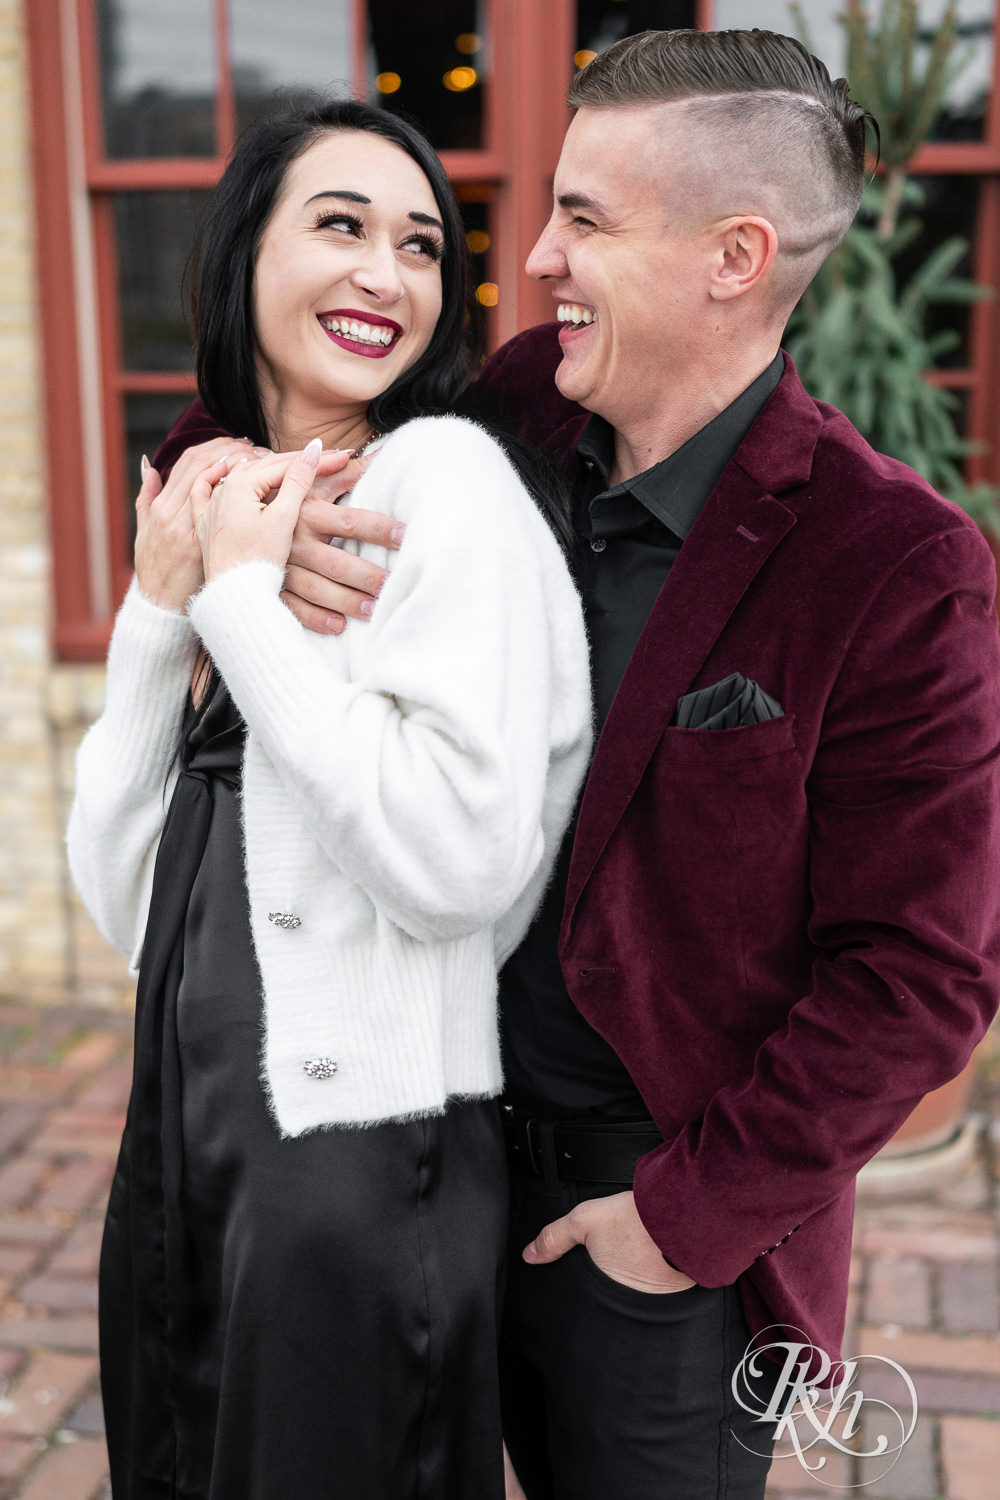 Man in black clothes and burgundy jacket and woman in black dress smile during engagement photography in Minneapolis, Minnesota.